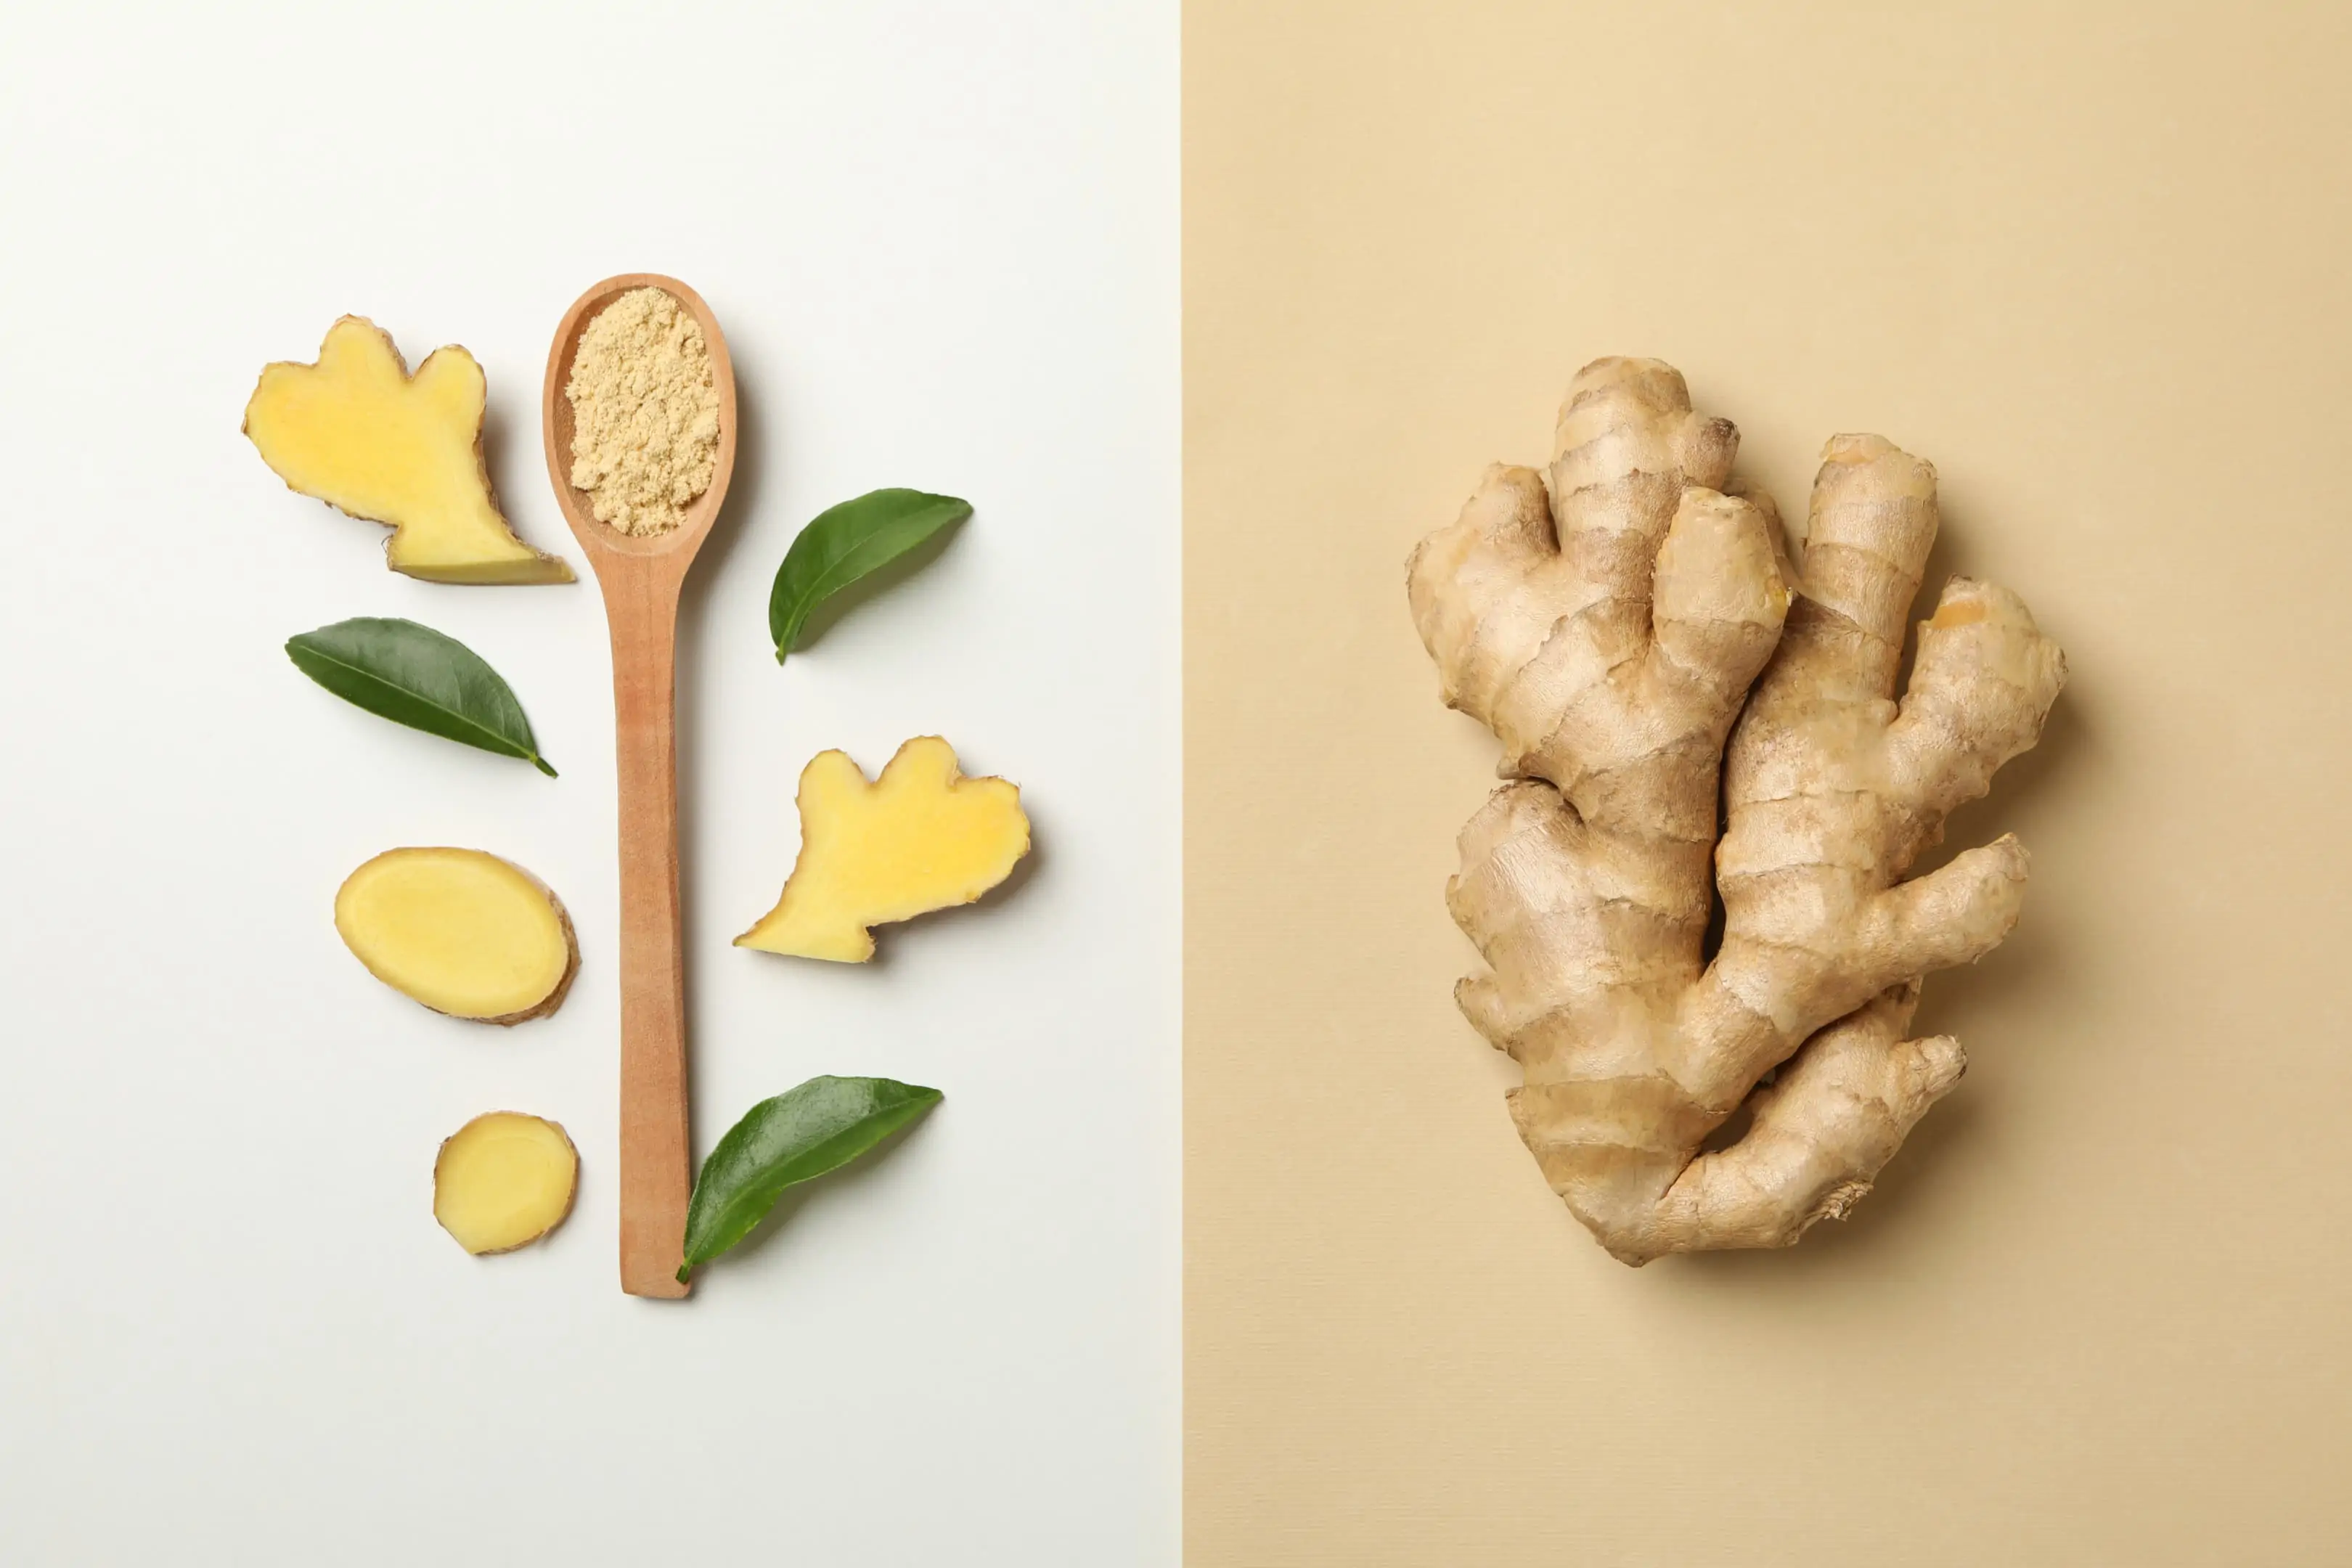 Sliced ginger and powder with a whole ginger root. Health benefit of ginger in different variations.